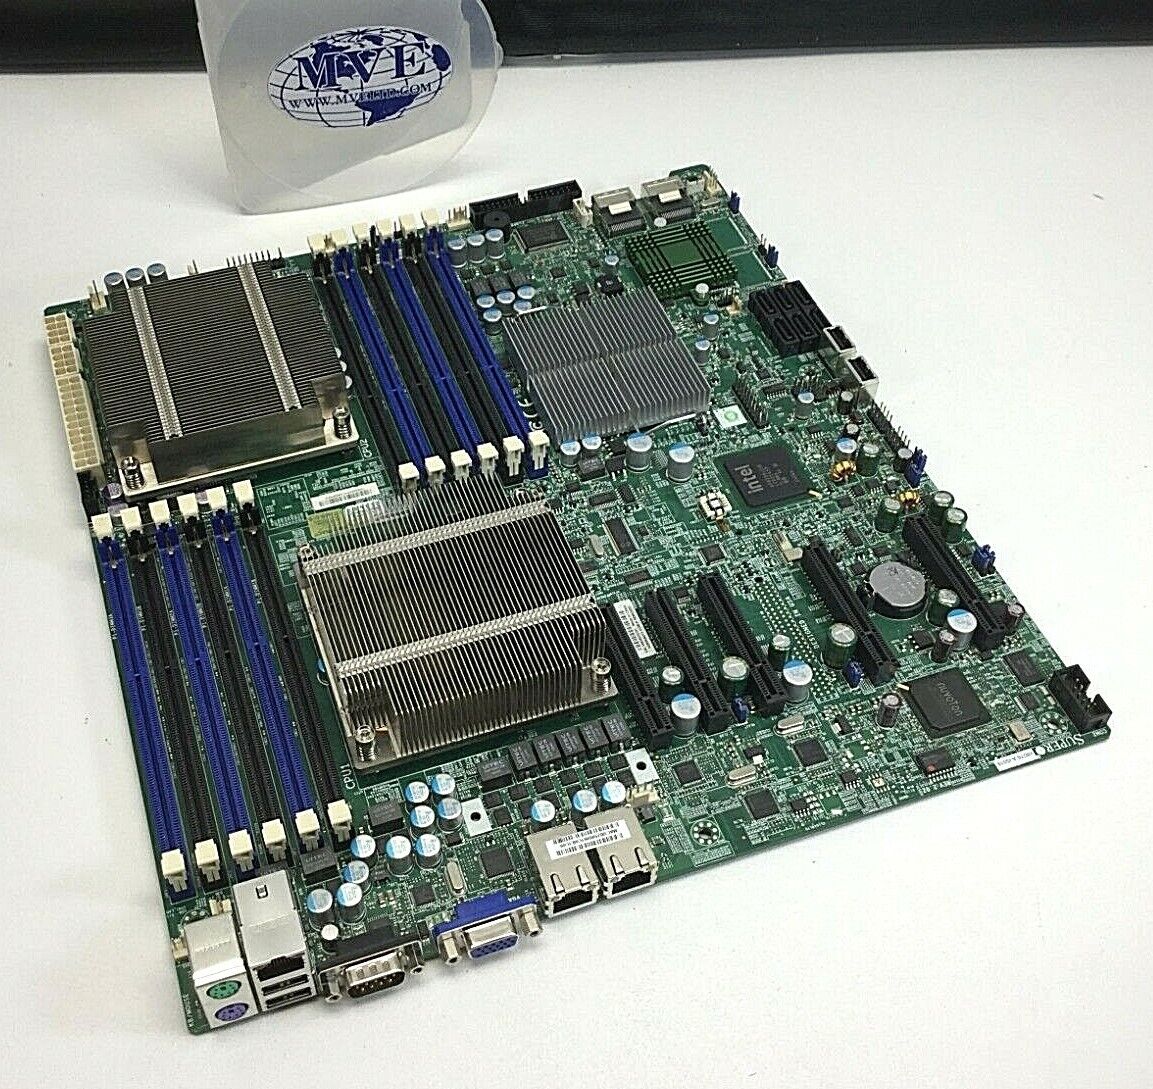 SUPERMICRO X8DT6 X8DT6-A-IS018 ISILON NL400 E5603 SYSTEM MOTHERBOARD